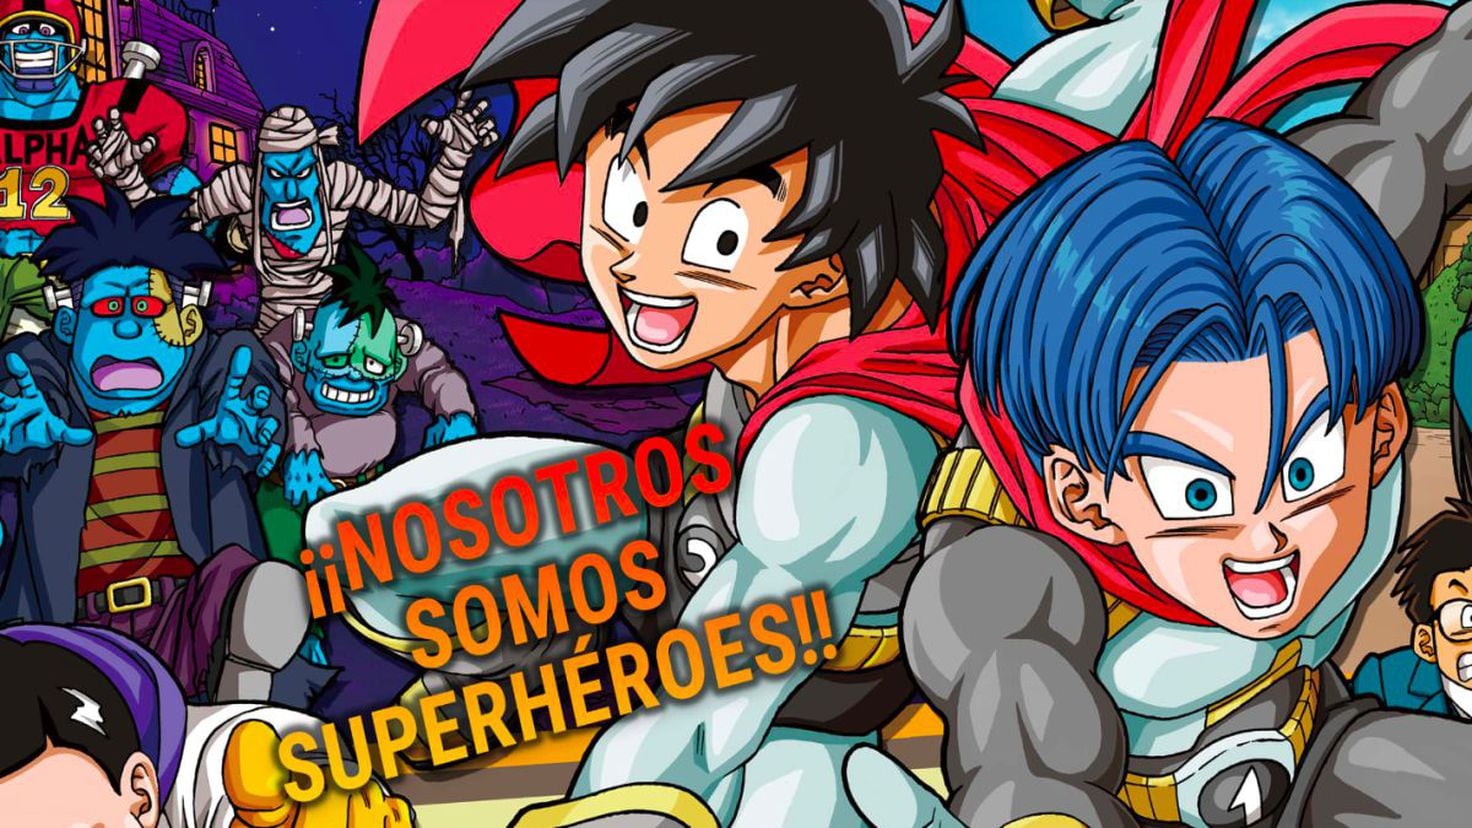 This is how Black Frieza looks like in color; new images of Goten and  Trunks as superheroes - Meristation